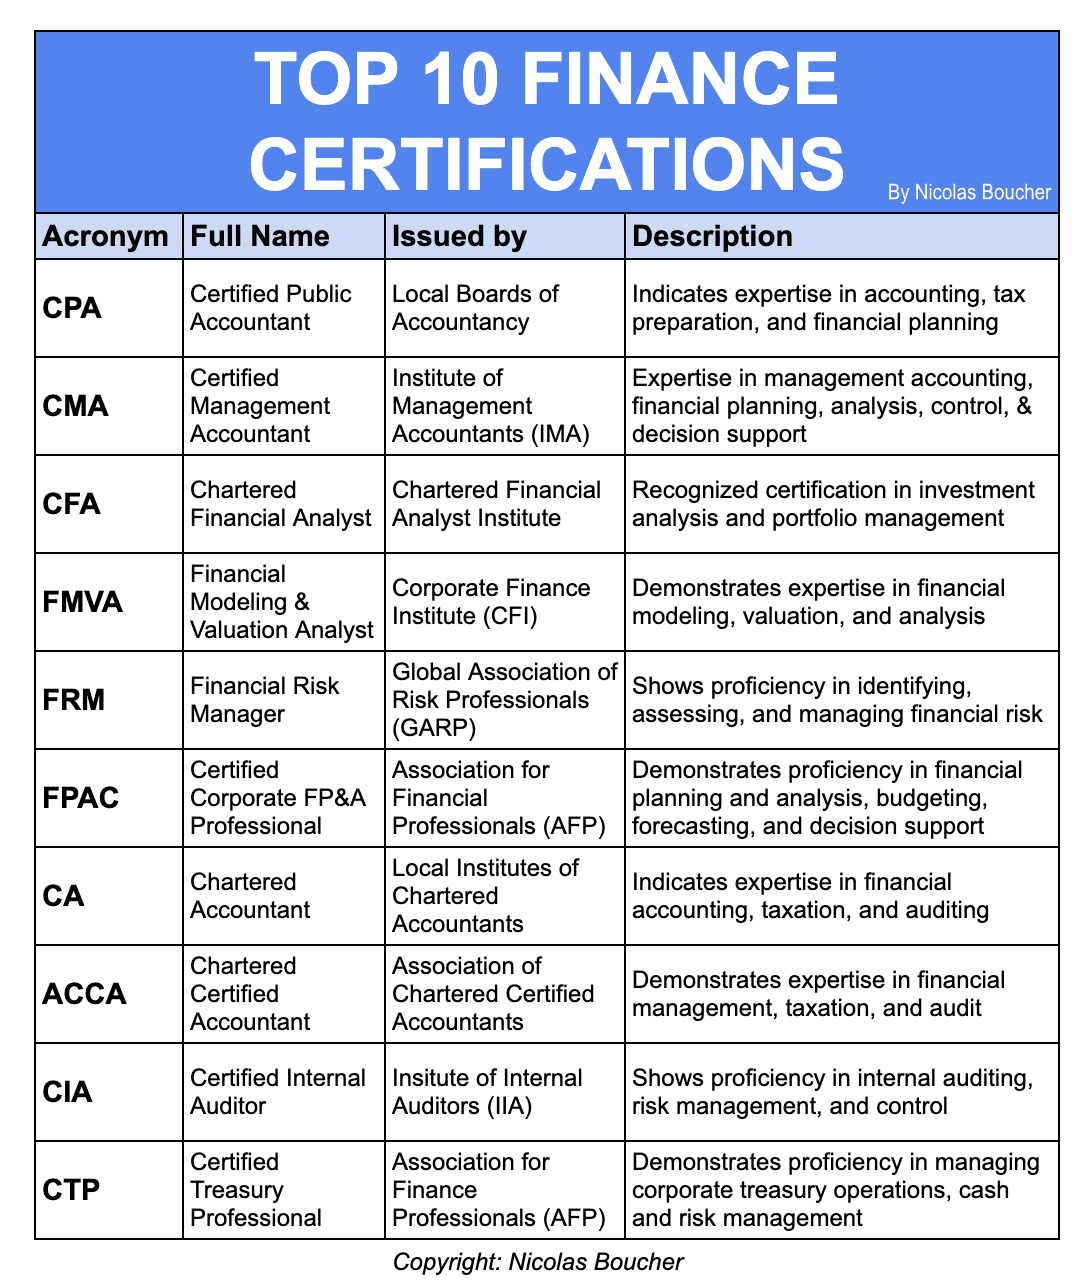 Table of the top 10 finance certifications.